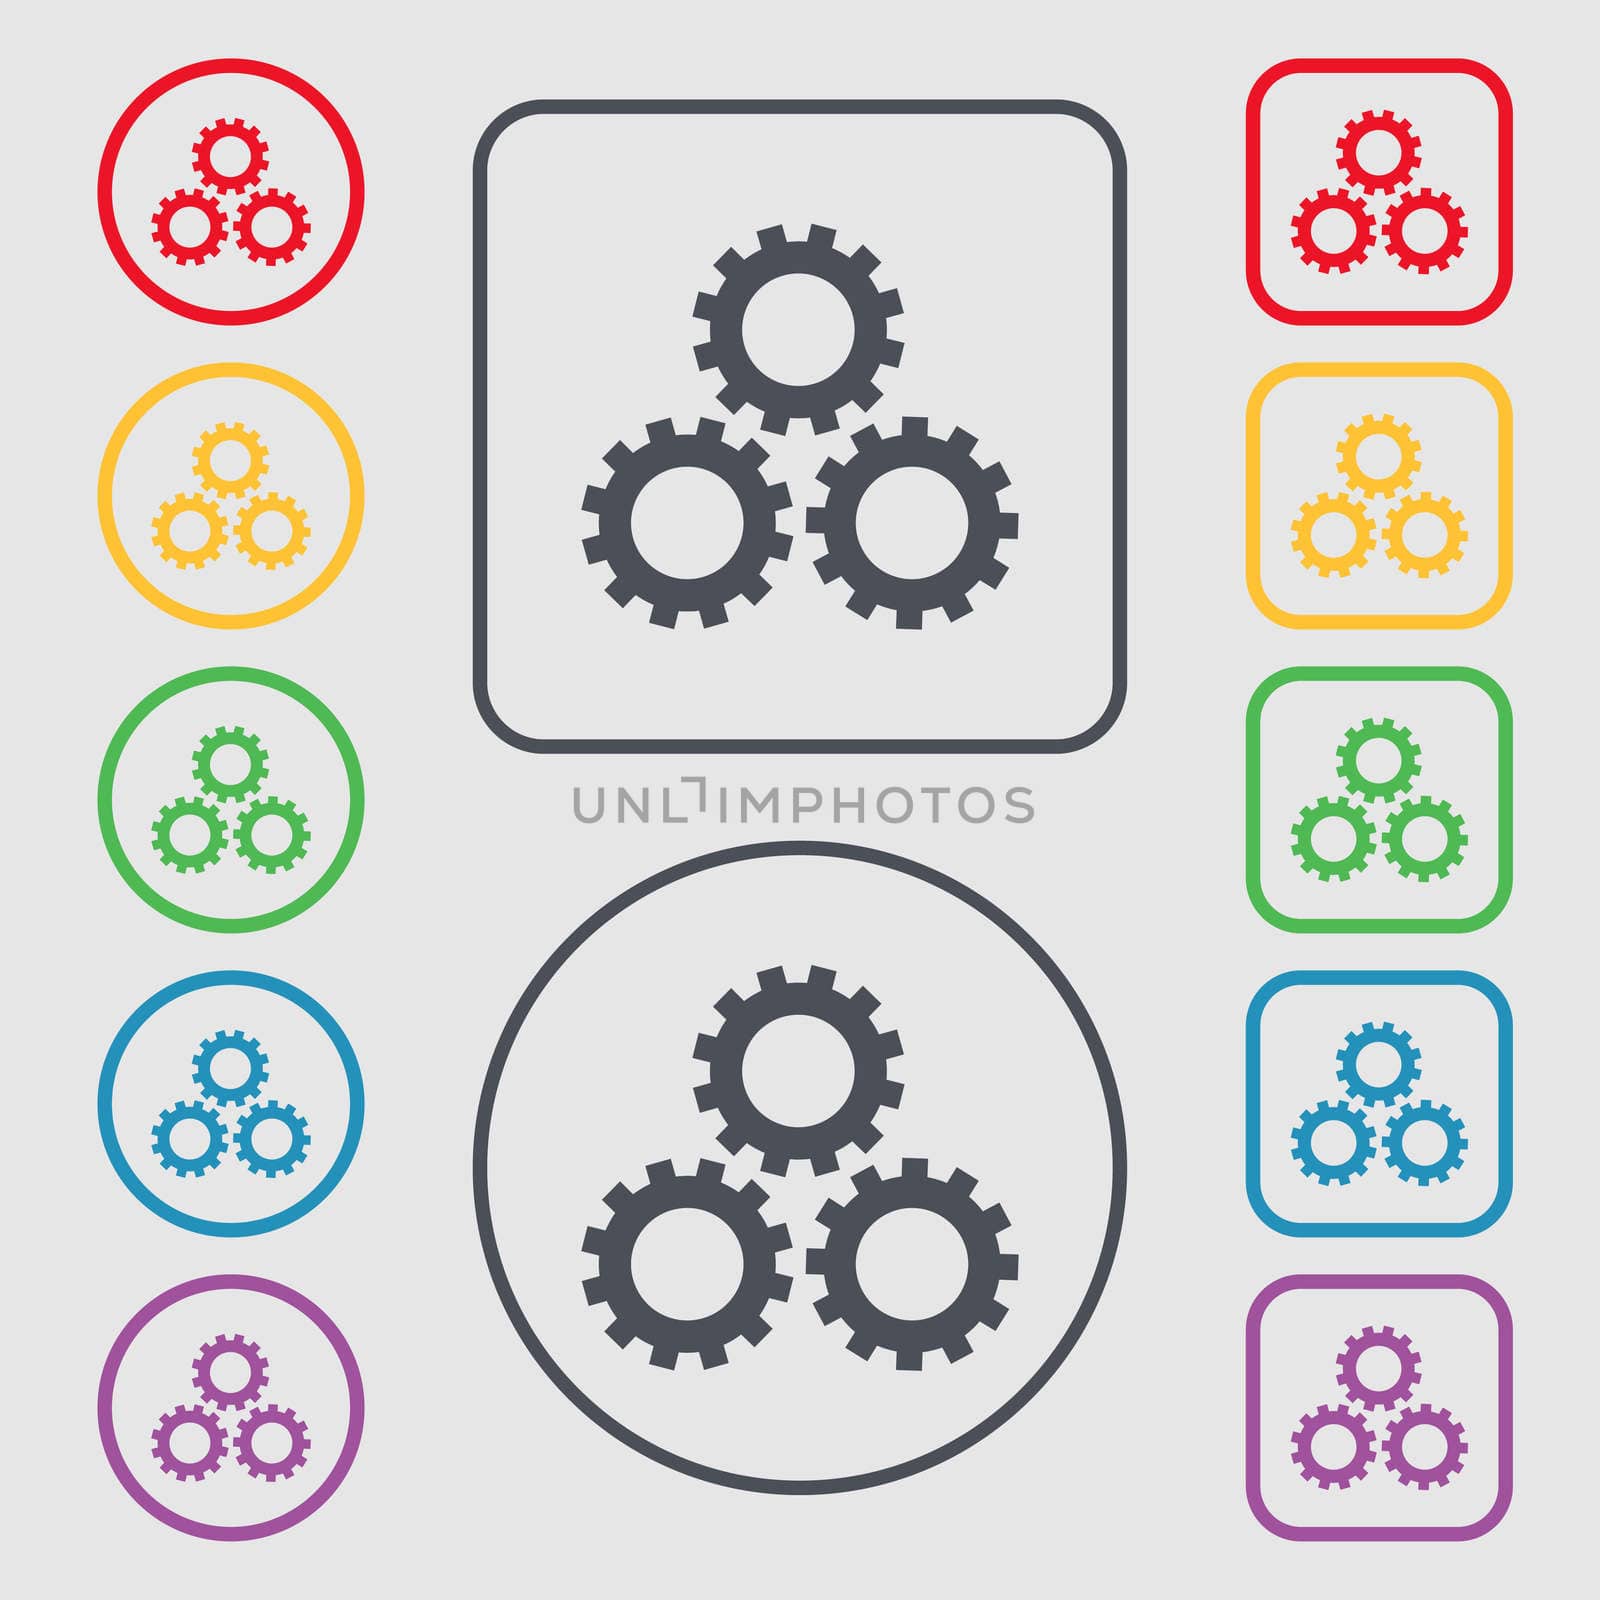 Cog settings sign icon. Cogwheel gear mechanism symbol. Symbols on the Round and square buttons with frame. illustration